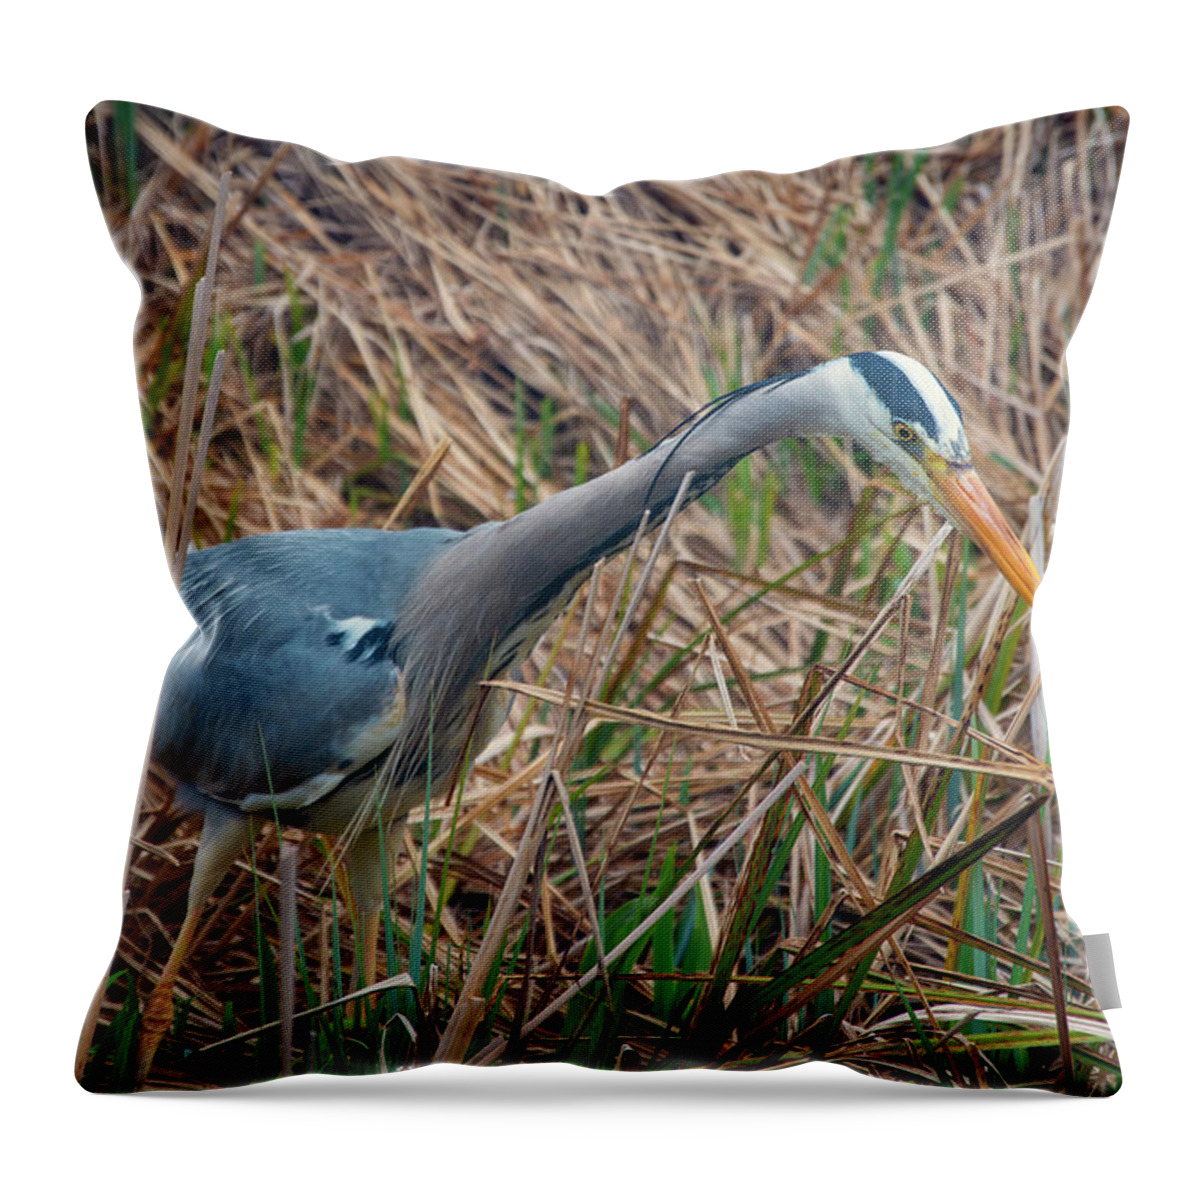 Heron Throw Pillow featuring the photograph Heron 3 by Steev Stamford